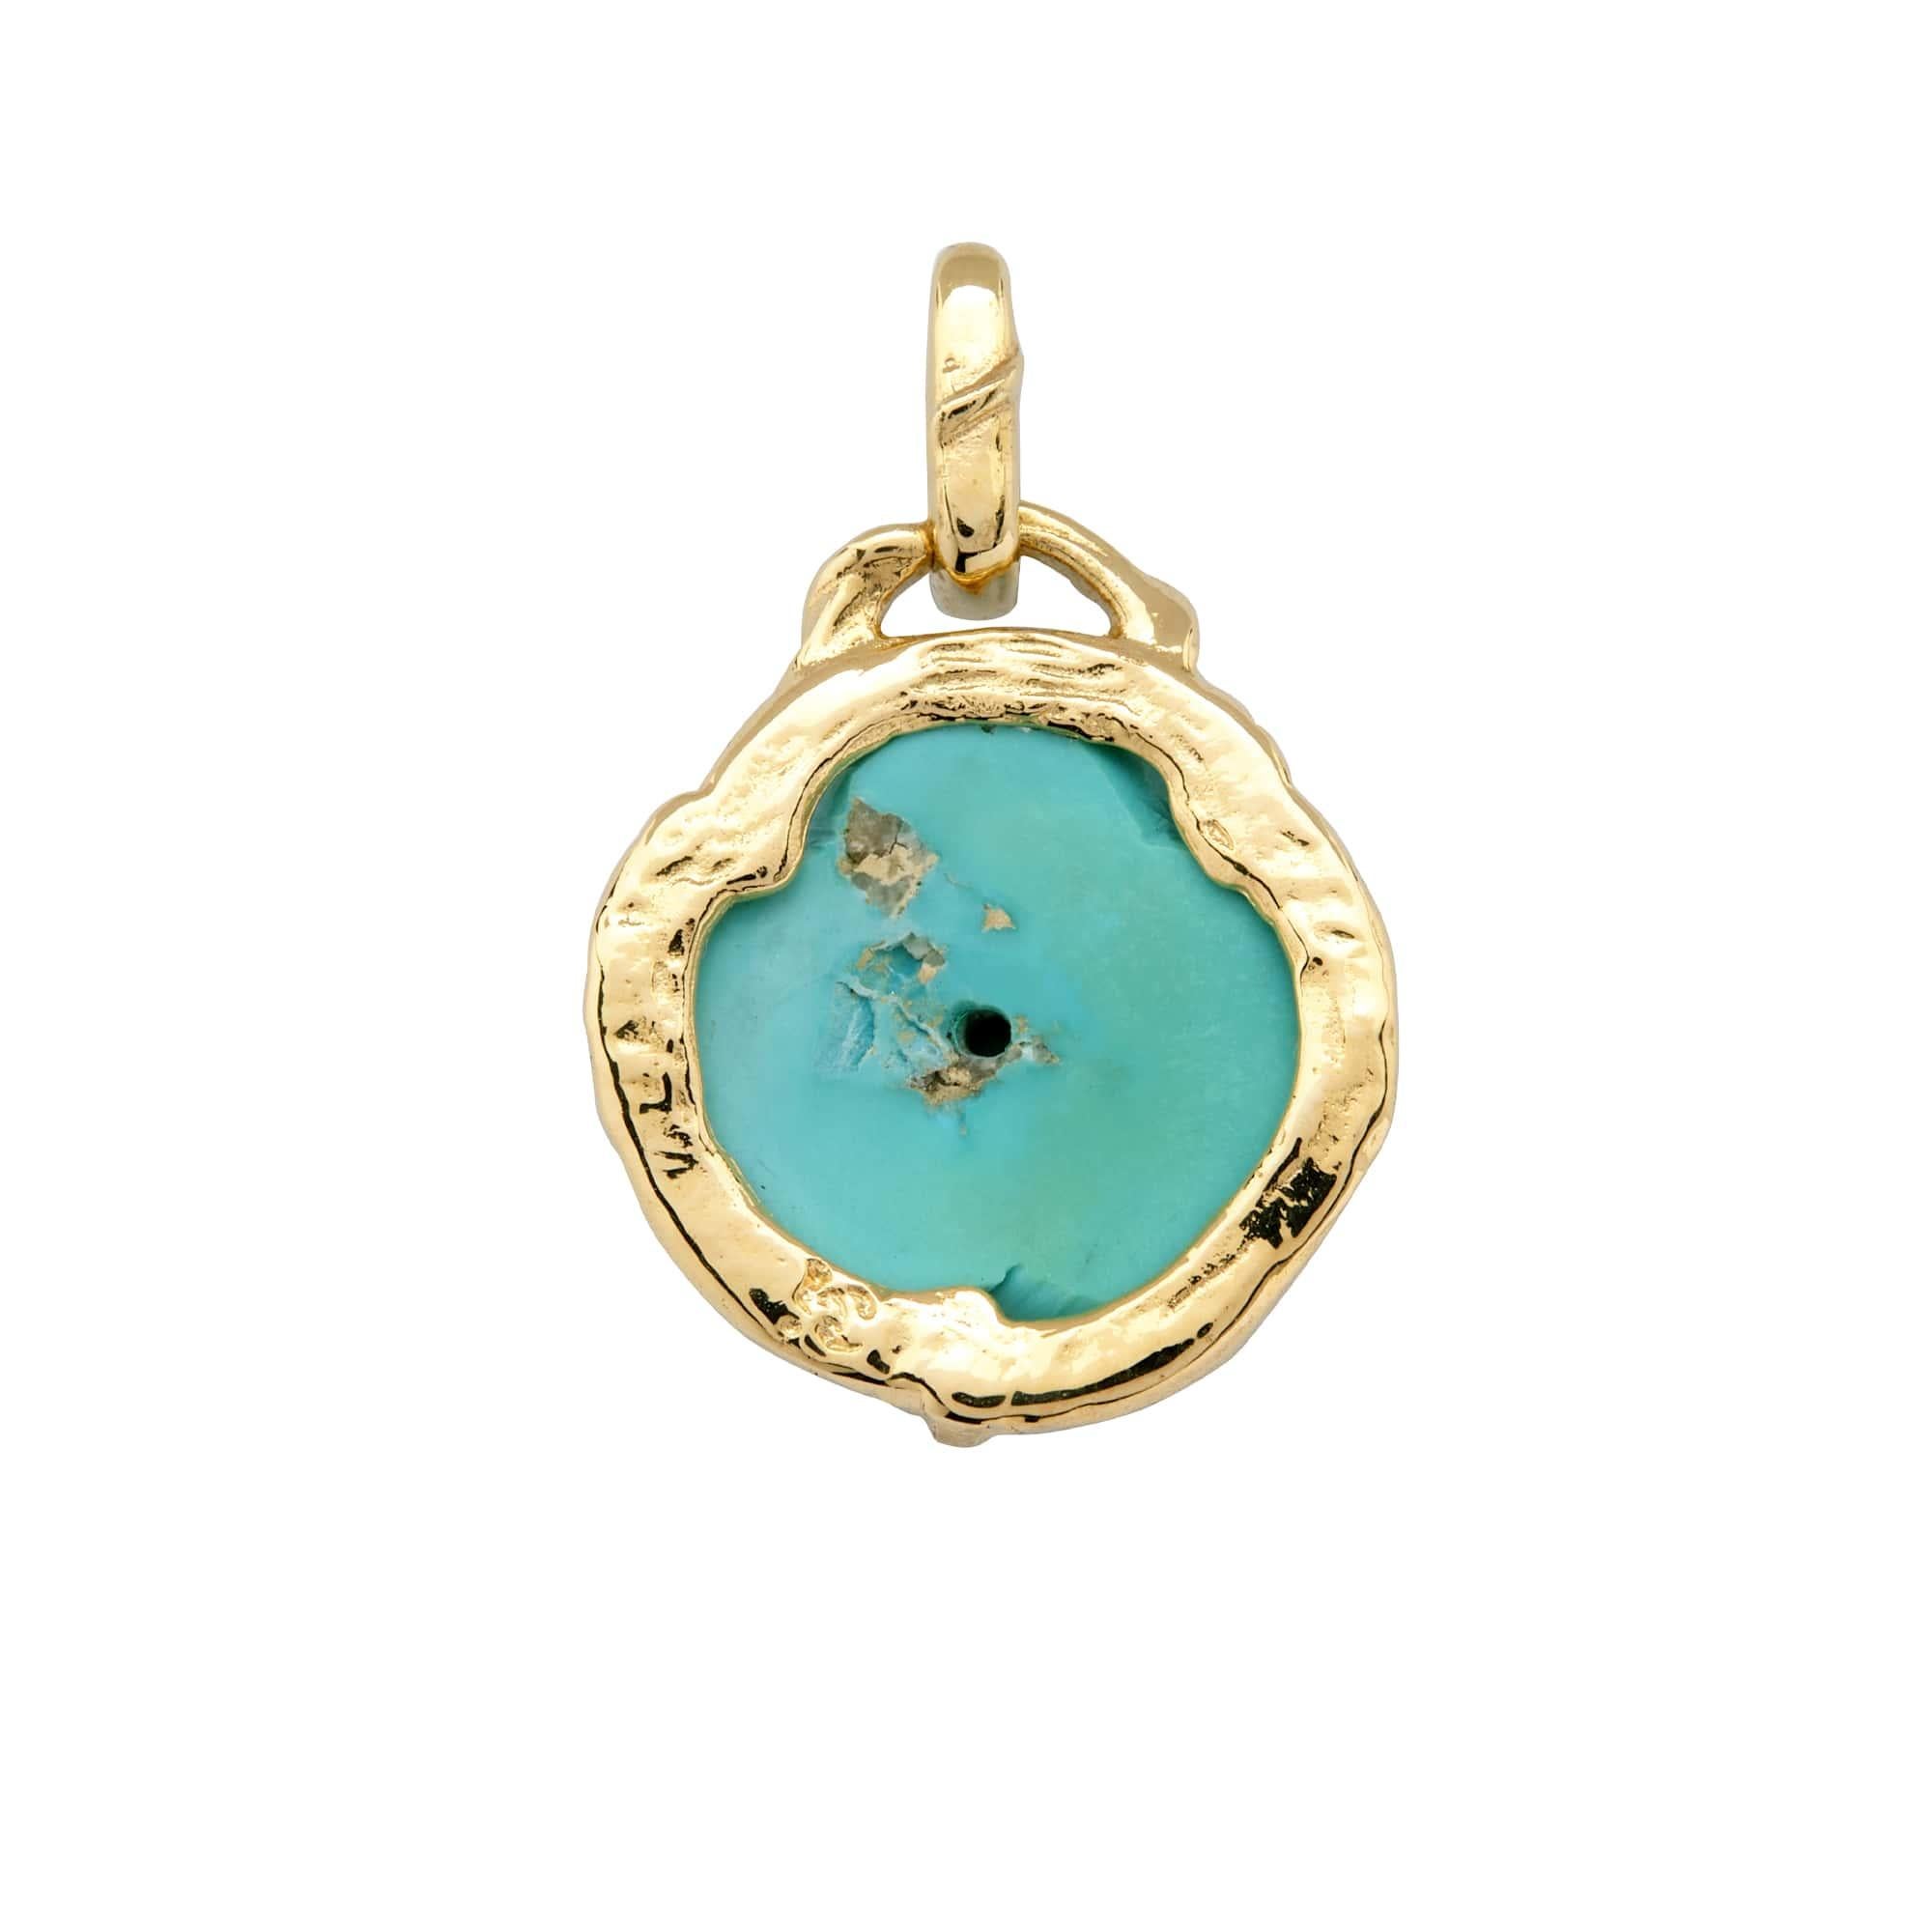 Our poetic Gabrielle charm pendant features a carved rosebud in American Turquoise from the Sleeping Beauty Mine in Arizona.  This gemstone carving is set in an organic weathered texture 14k yellow gold design with thorny claws and is suspended from